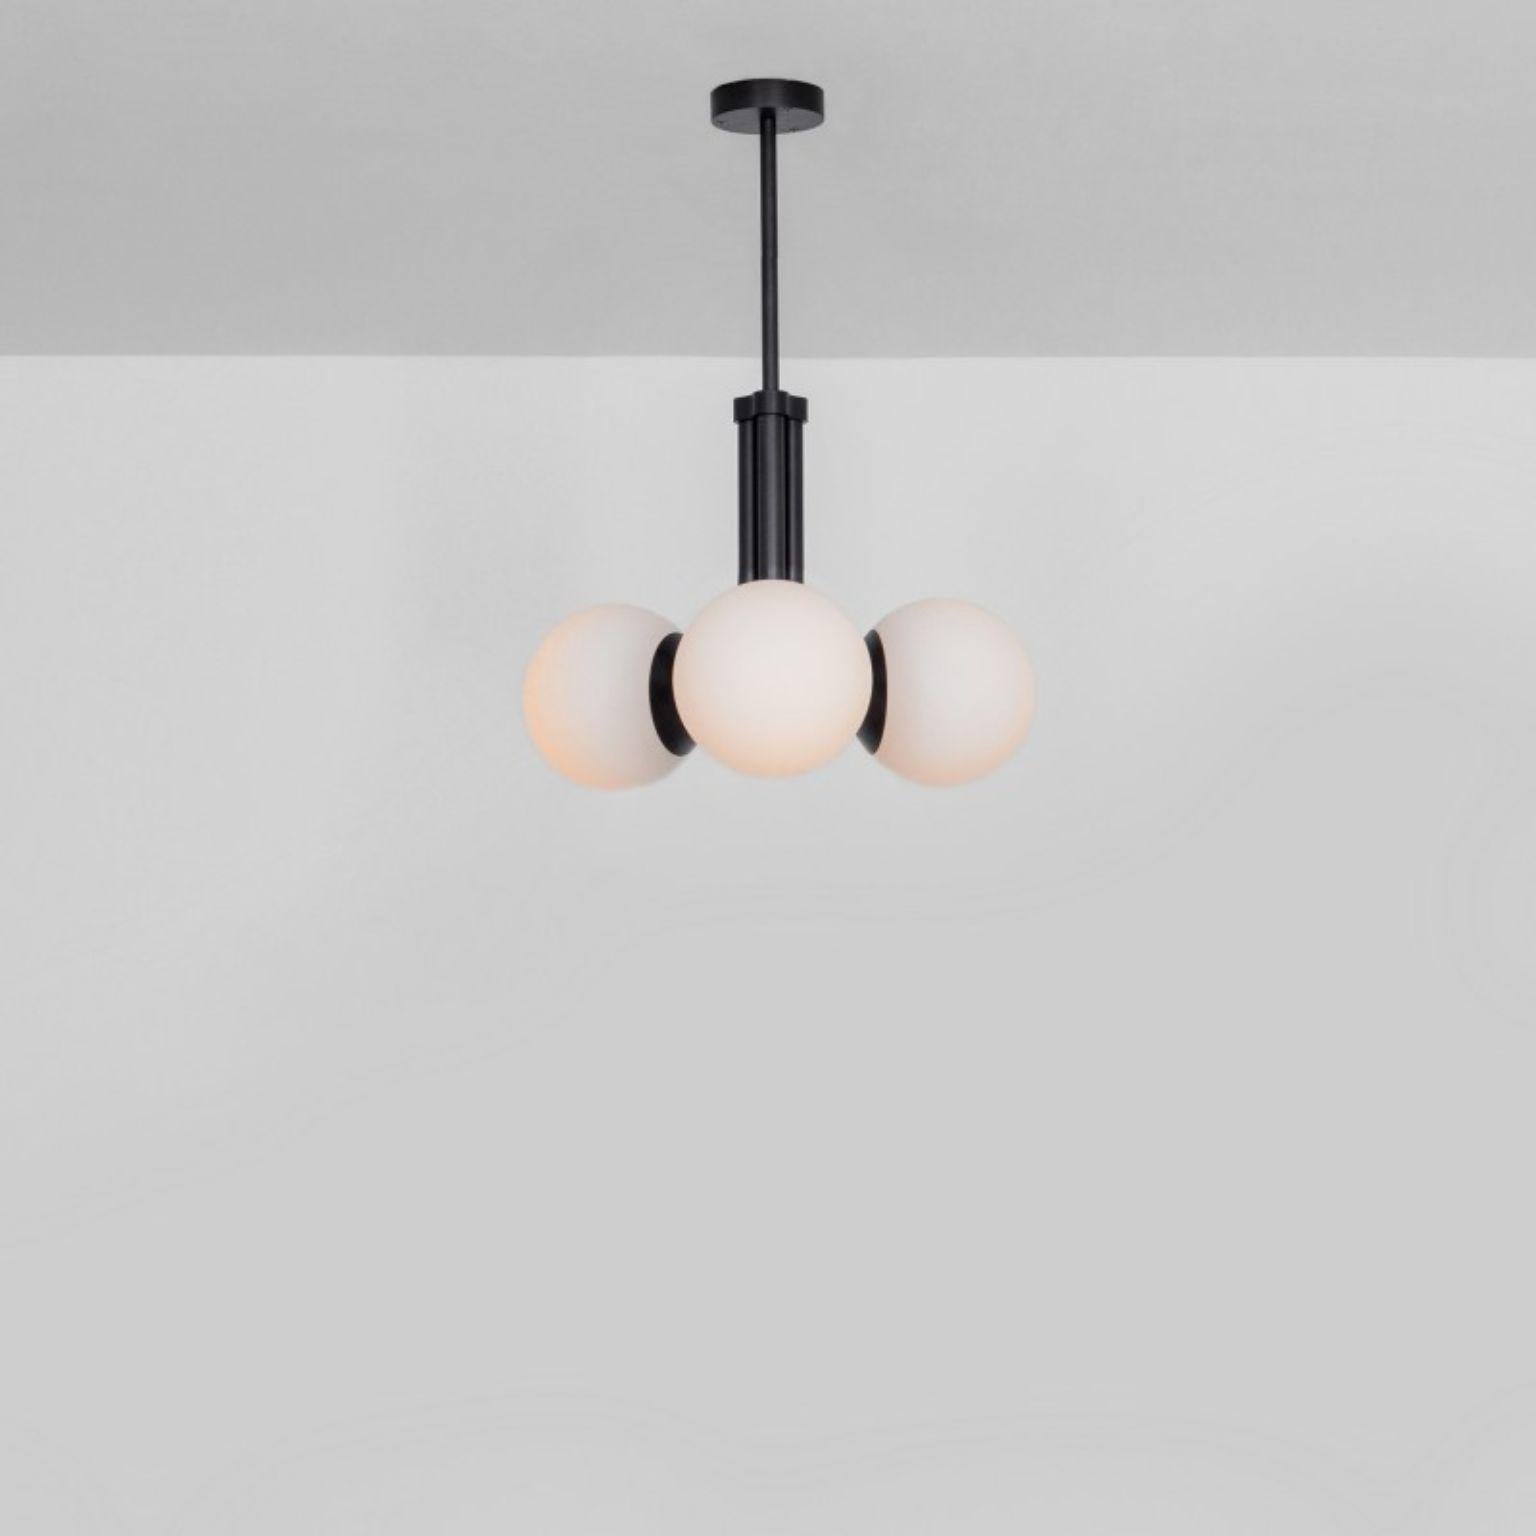 Tubular SM Black Pendant Light 3 by Schwung
Dimensions: W 48 x D 48 x H 58 cm
Materials: Black gunmetal, frosted glass

Finishes available: Black gunmetal, polished nickel, brass


Schwung is a German word, and loosely defined, means energy or